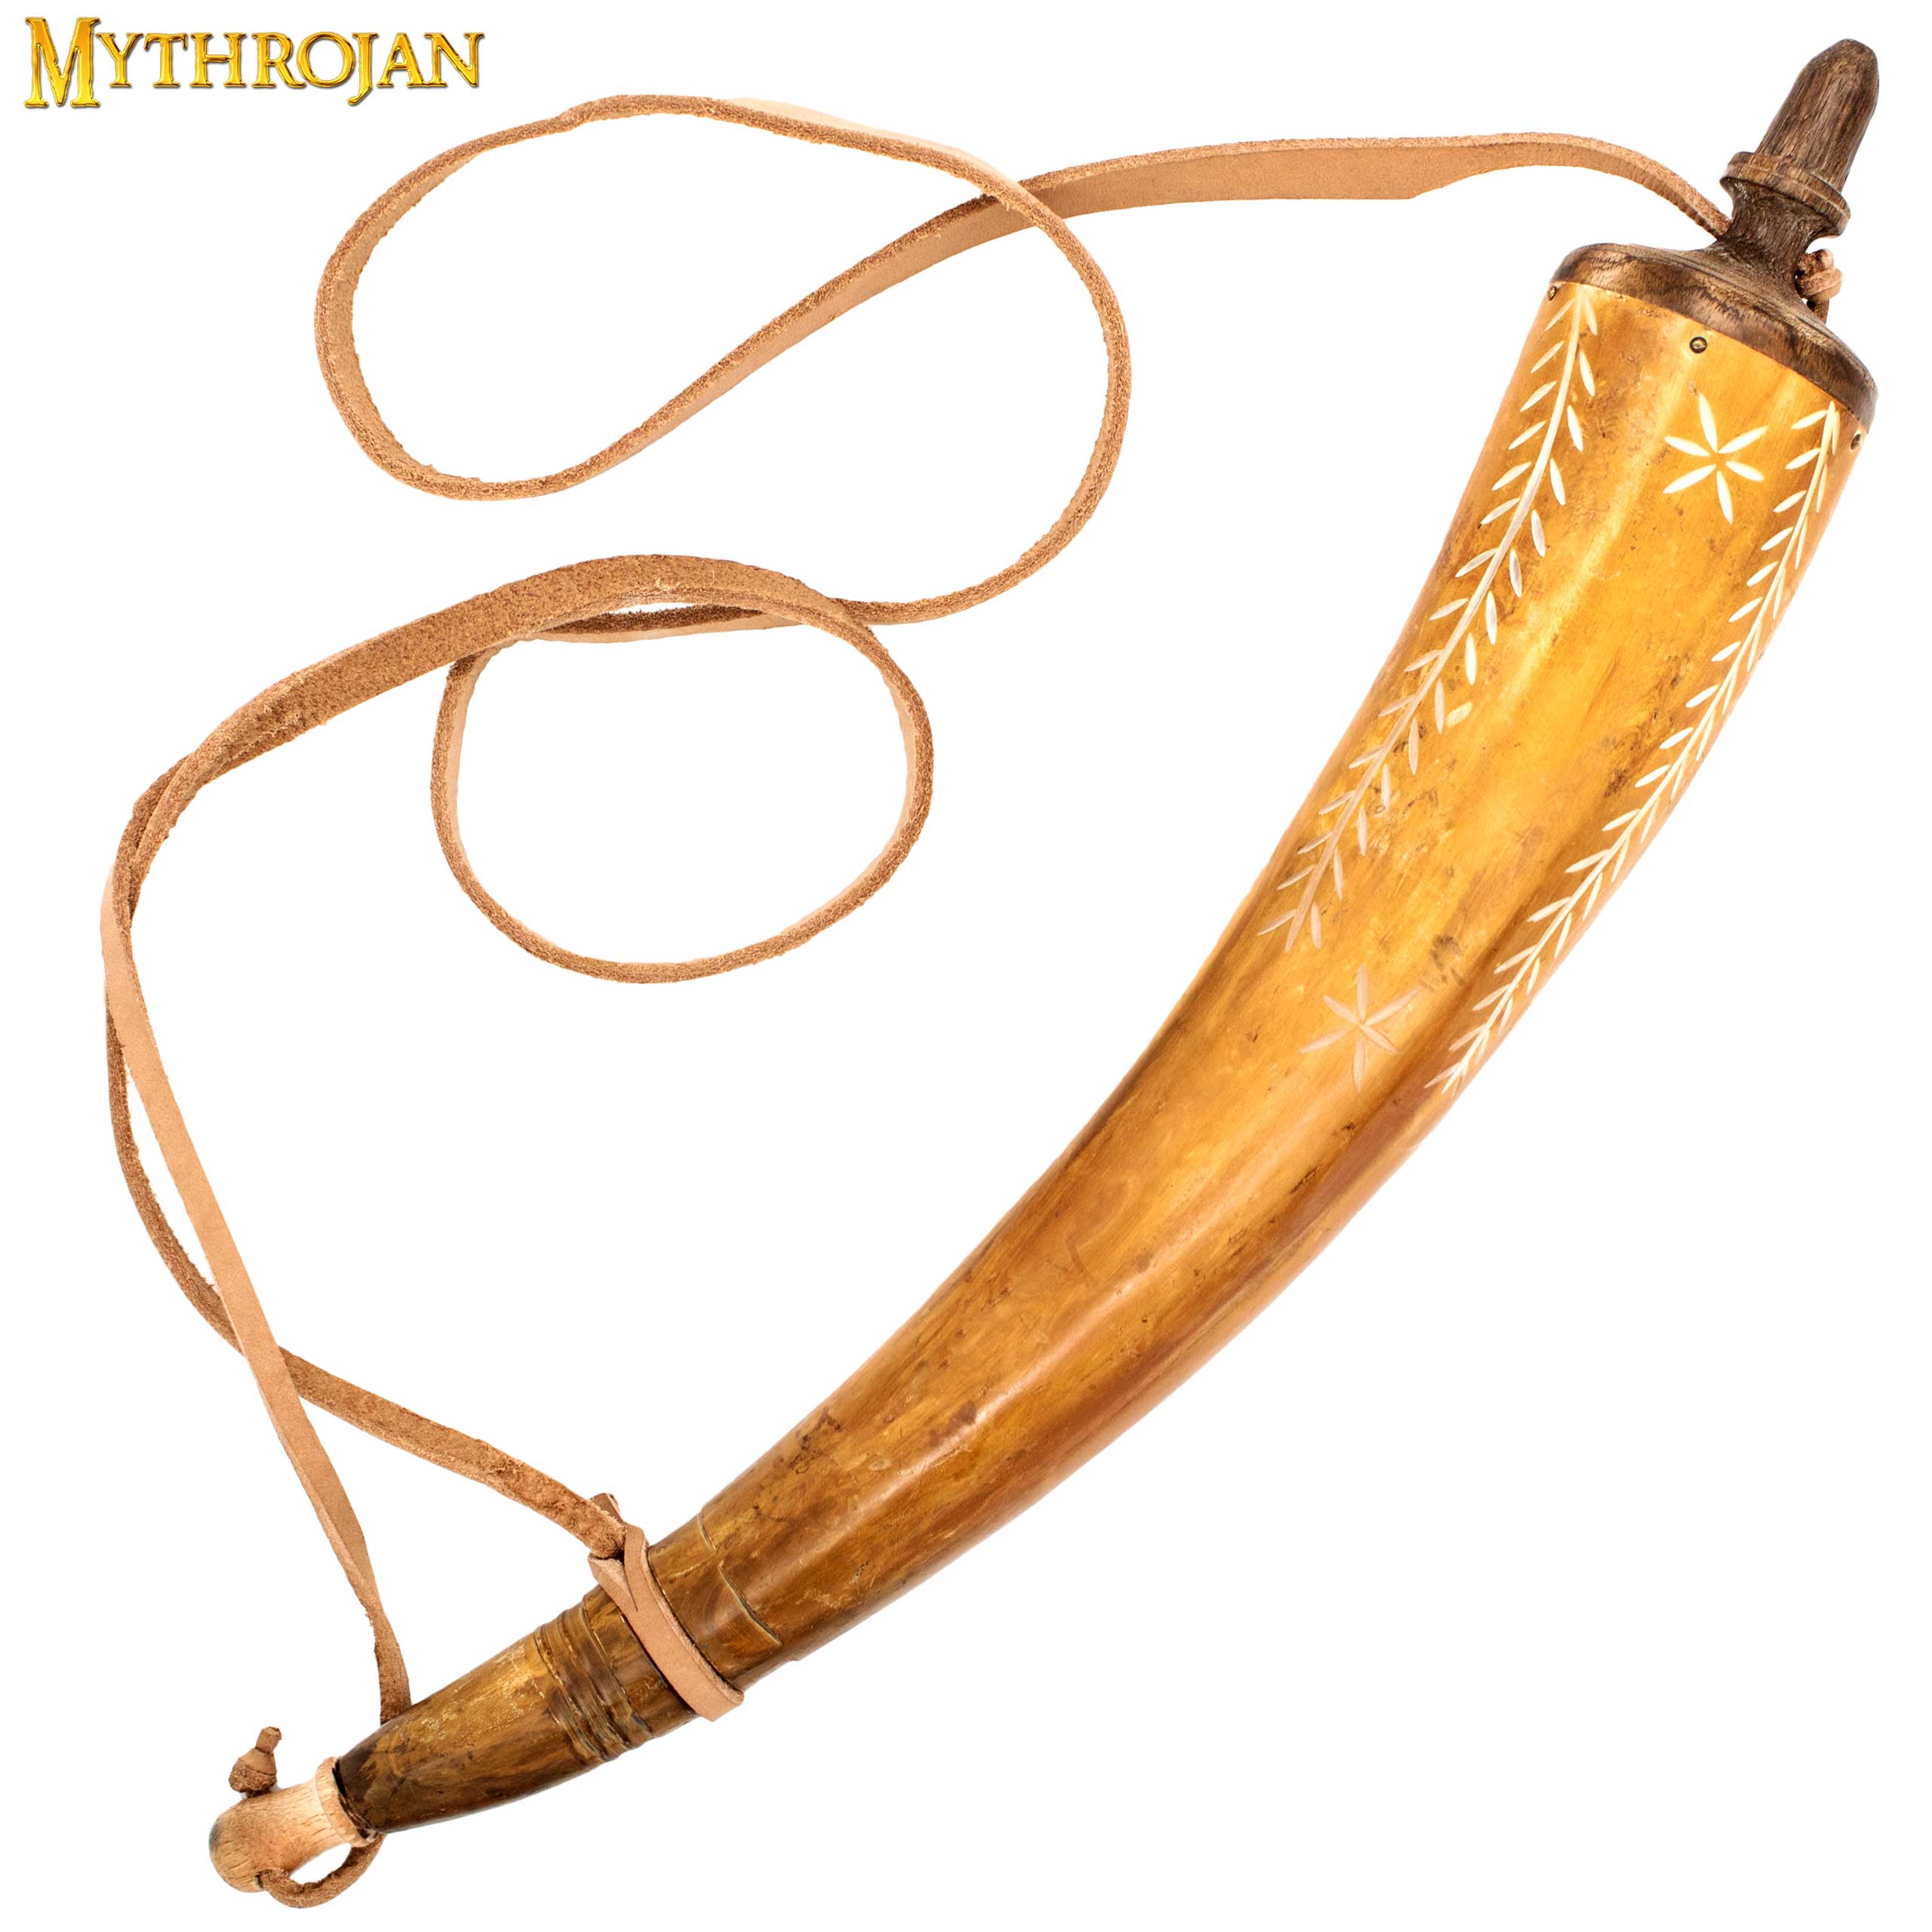 Mythrojan Hand Carved Powder Horn with Leather Strap for Civil War Re